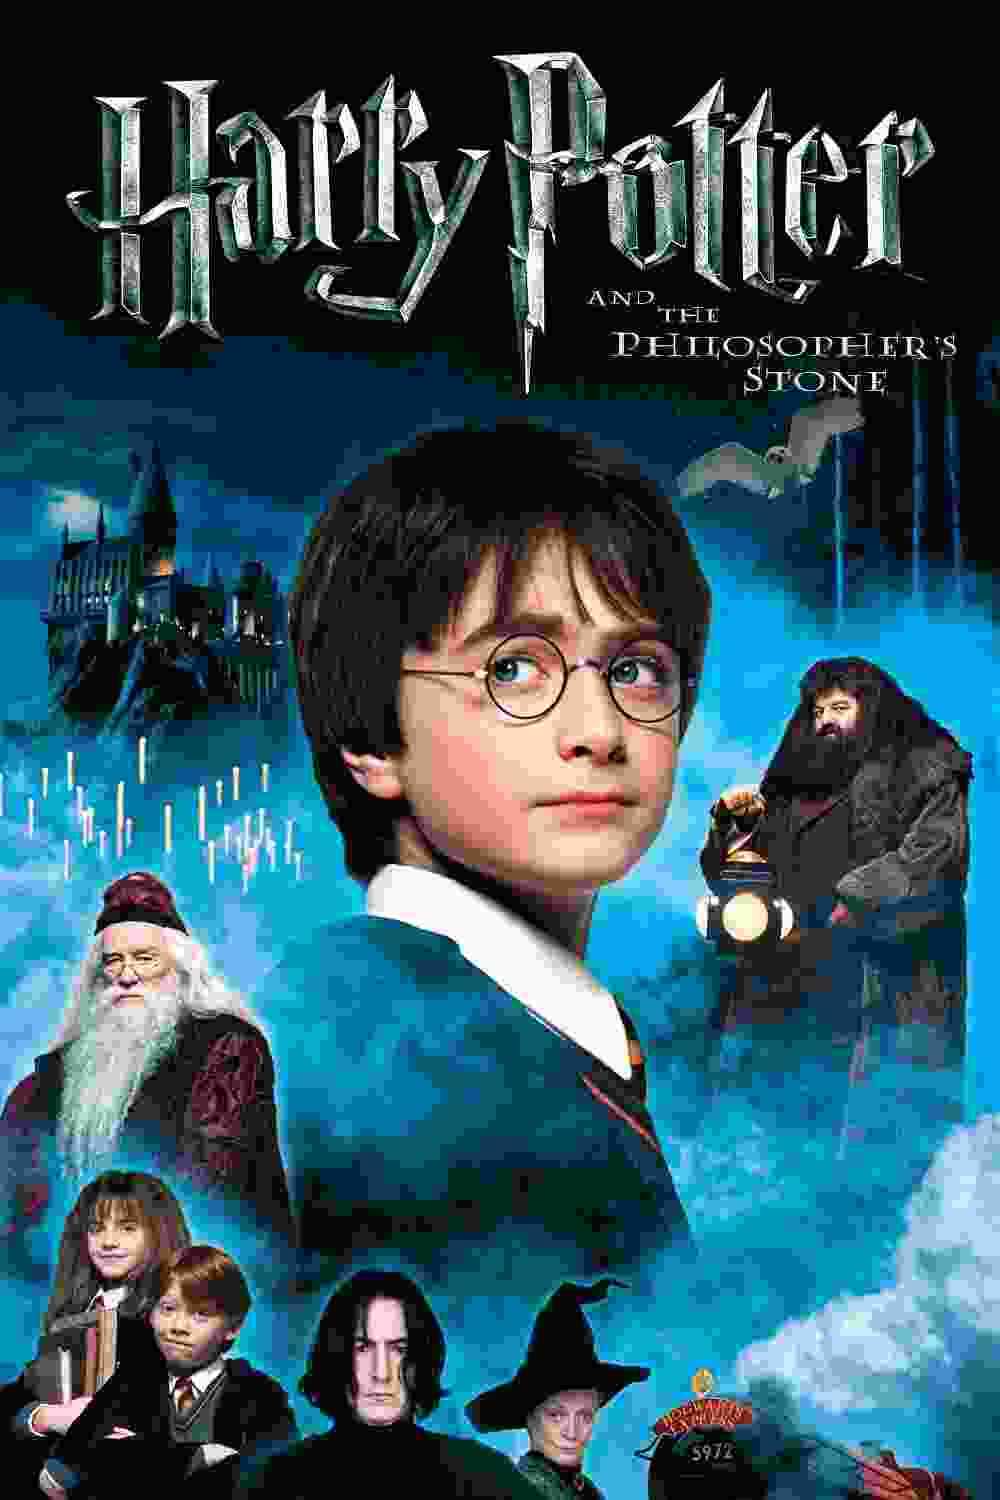 Harry Potter and the Sorcerer's Stone (2001) Daniel Radcliffe